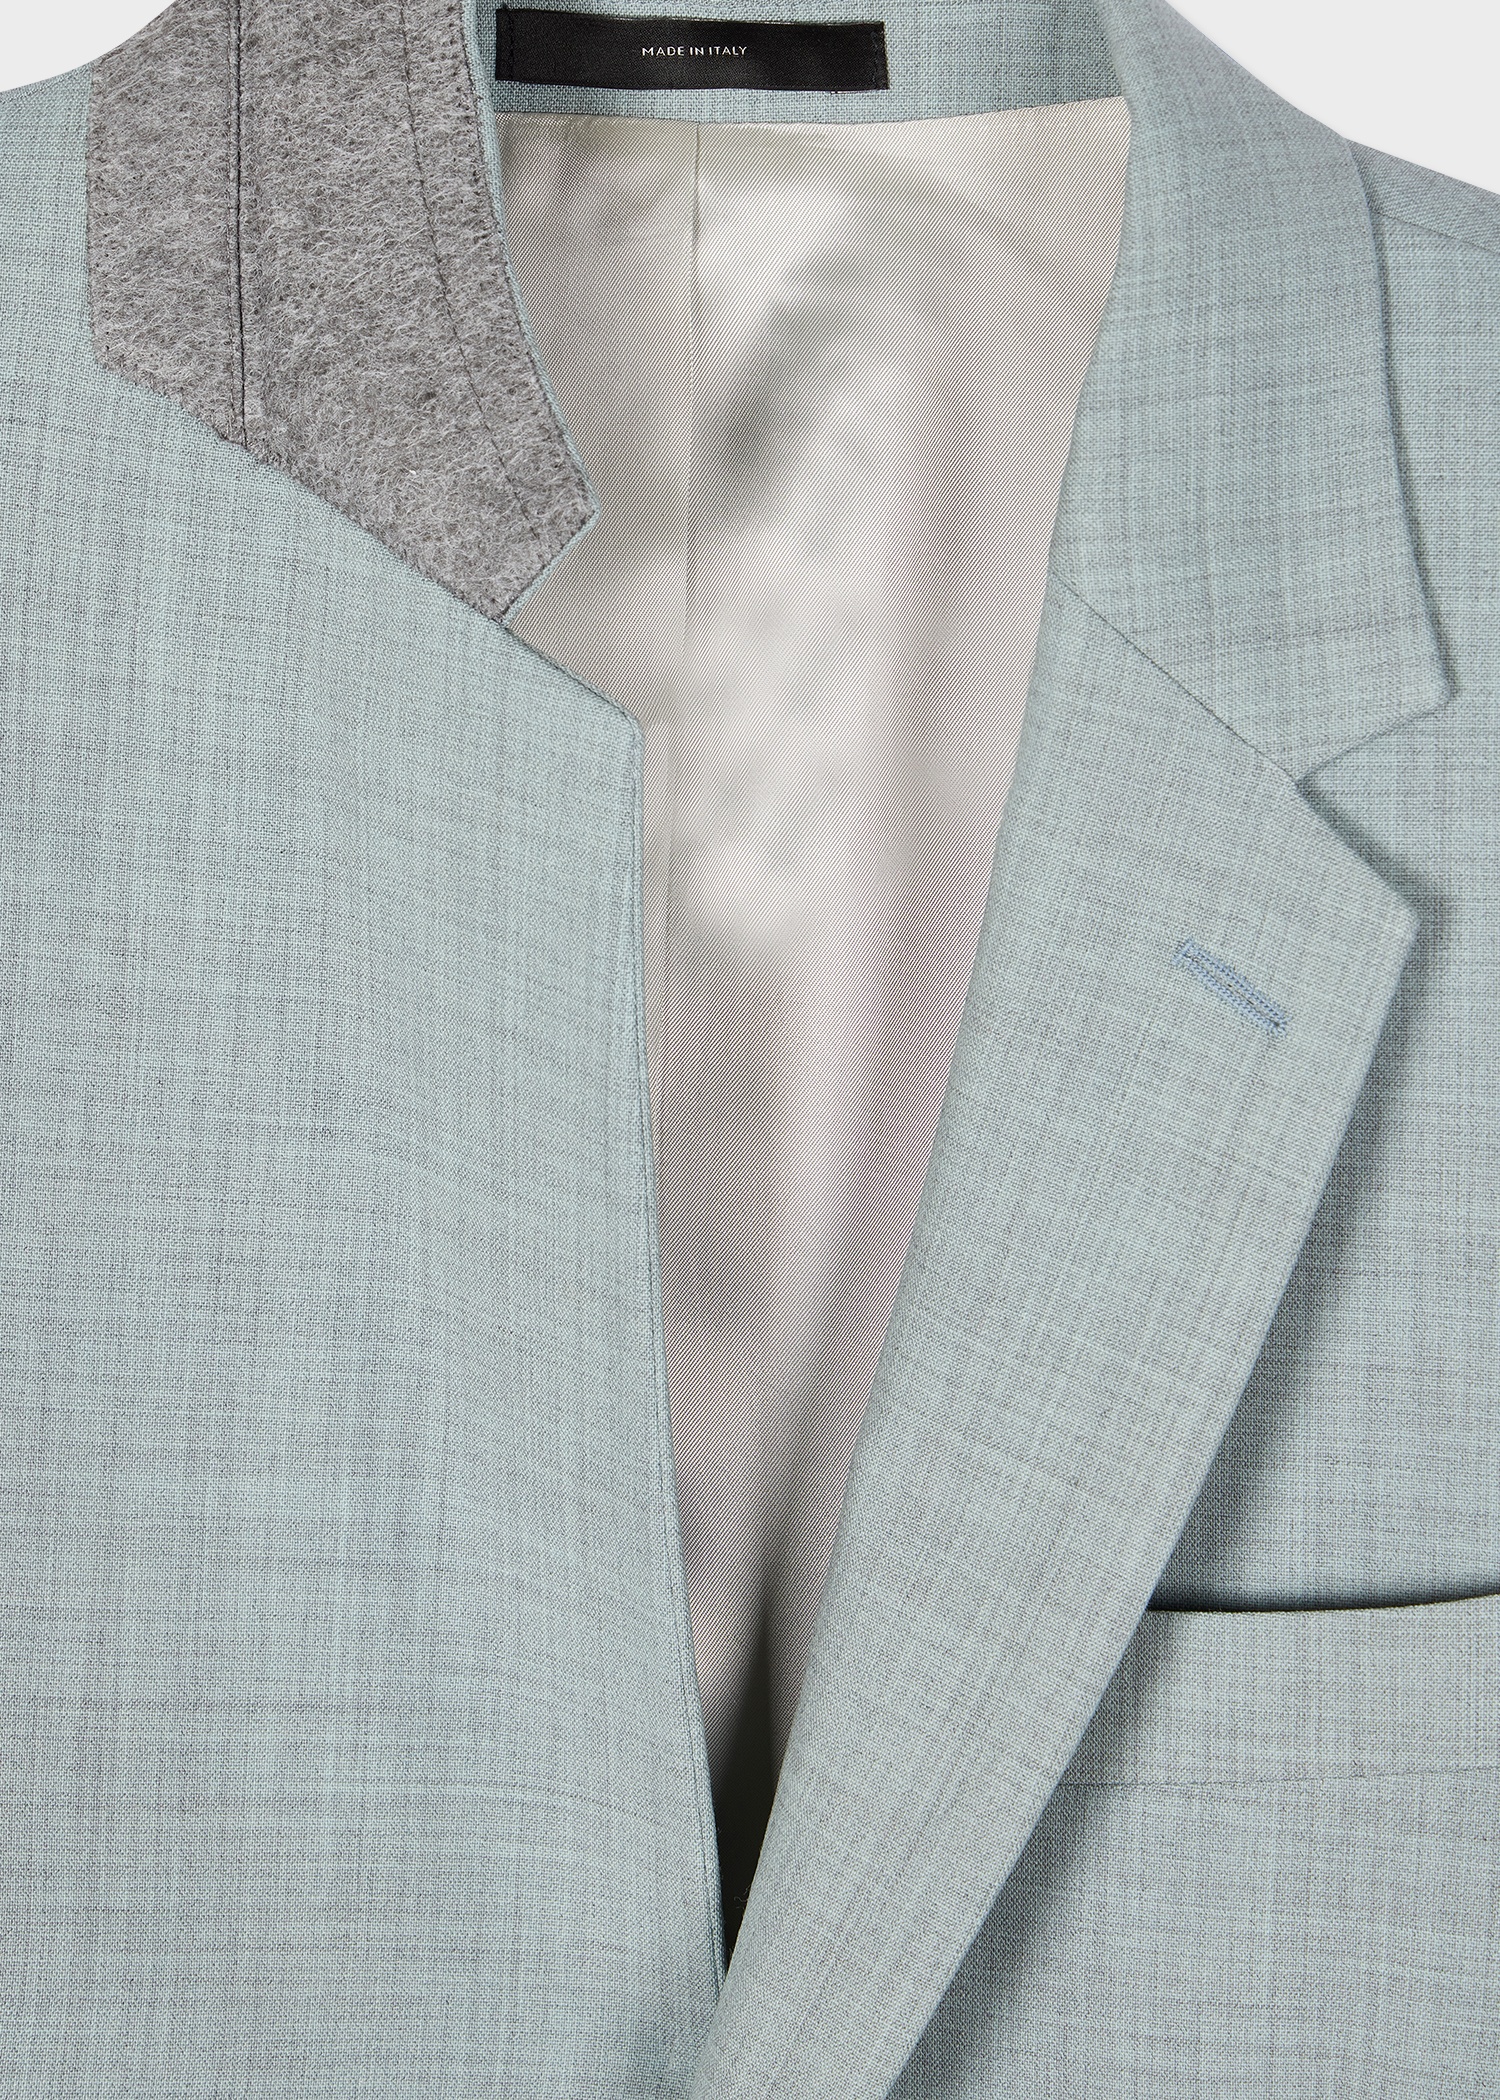 The Kensington - Light Blue Marl Overdyed Stretch-Wool Suit - 3